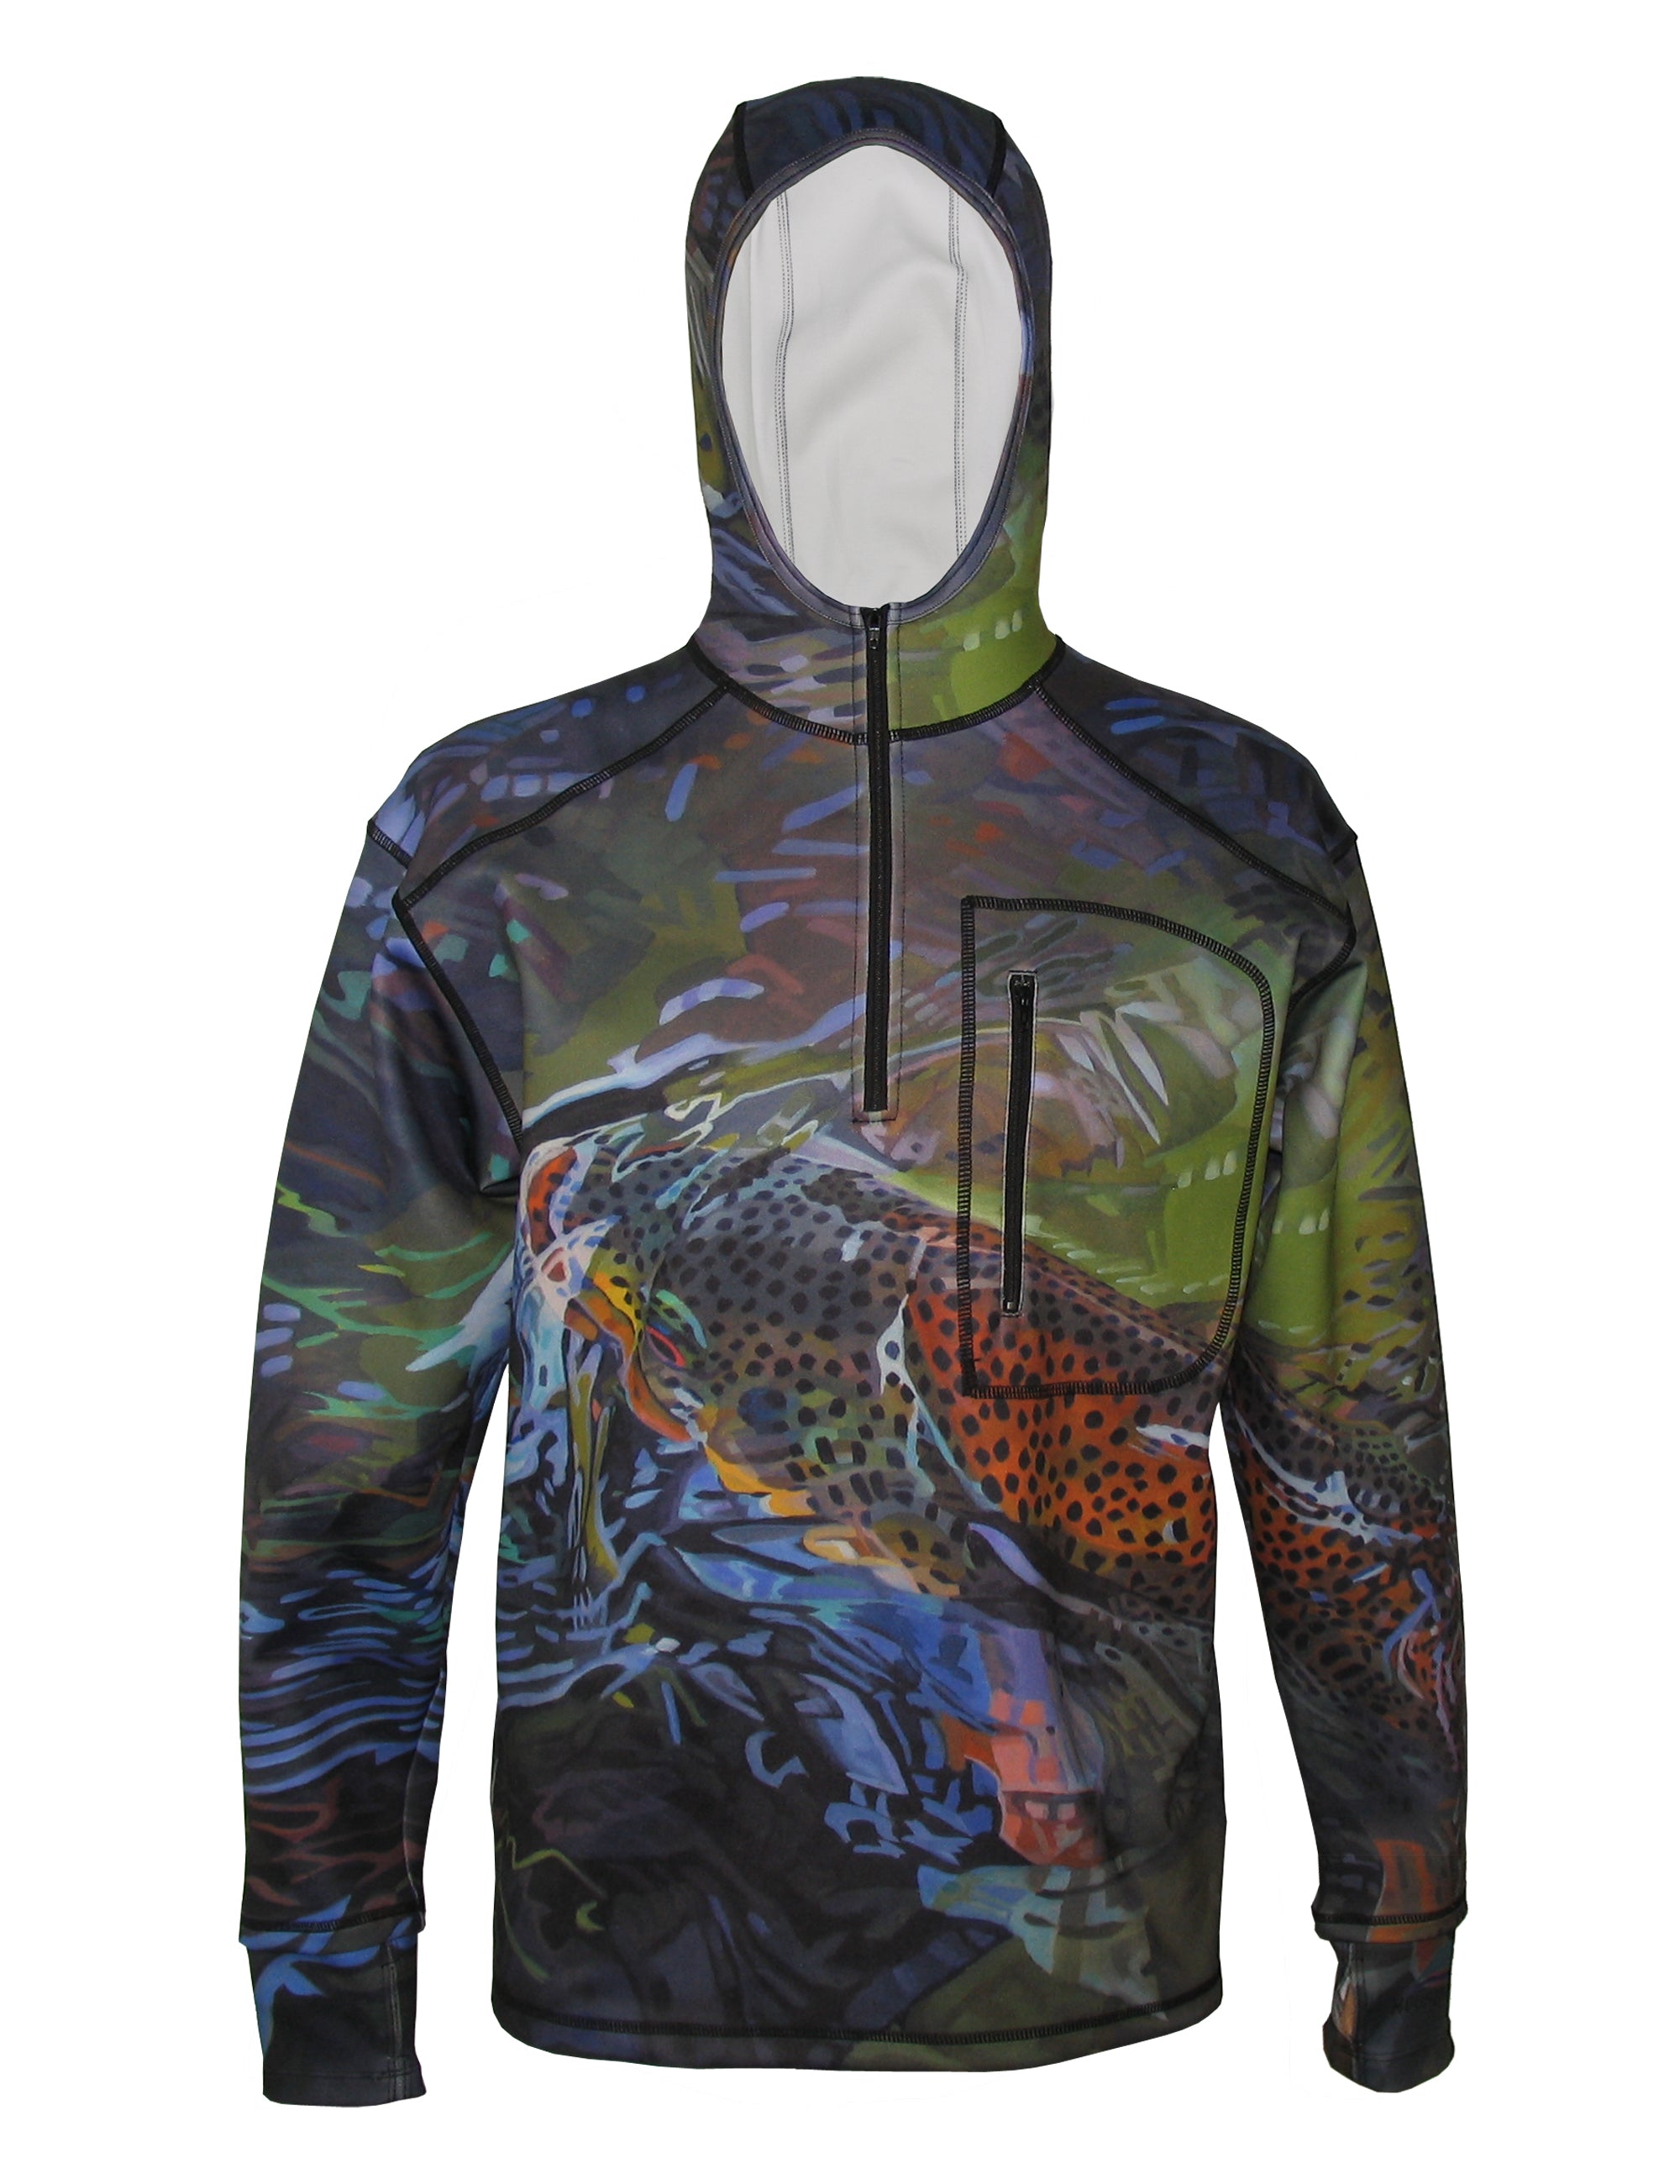 Fincognito Flexshell Hoodie 1/4-Zip Green Brown Fish Print Fly Fishing